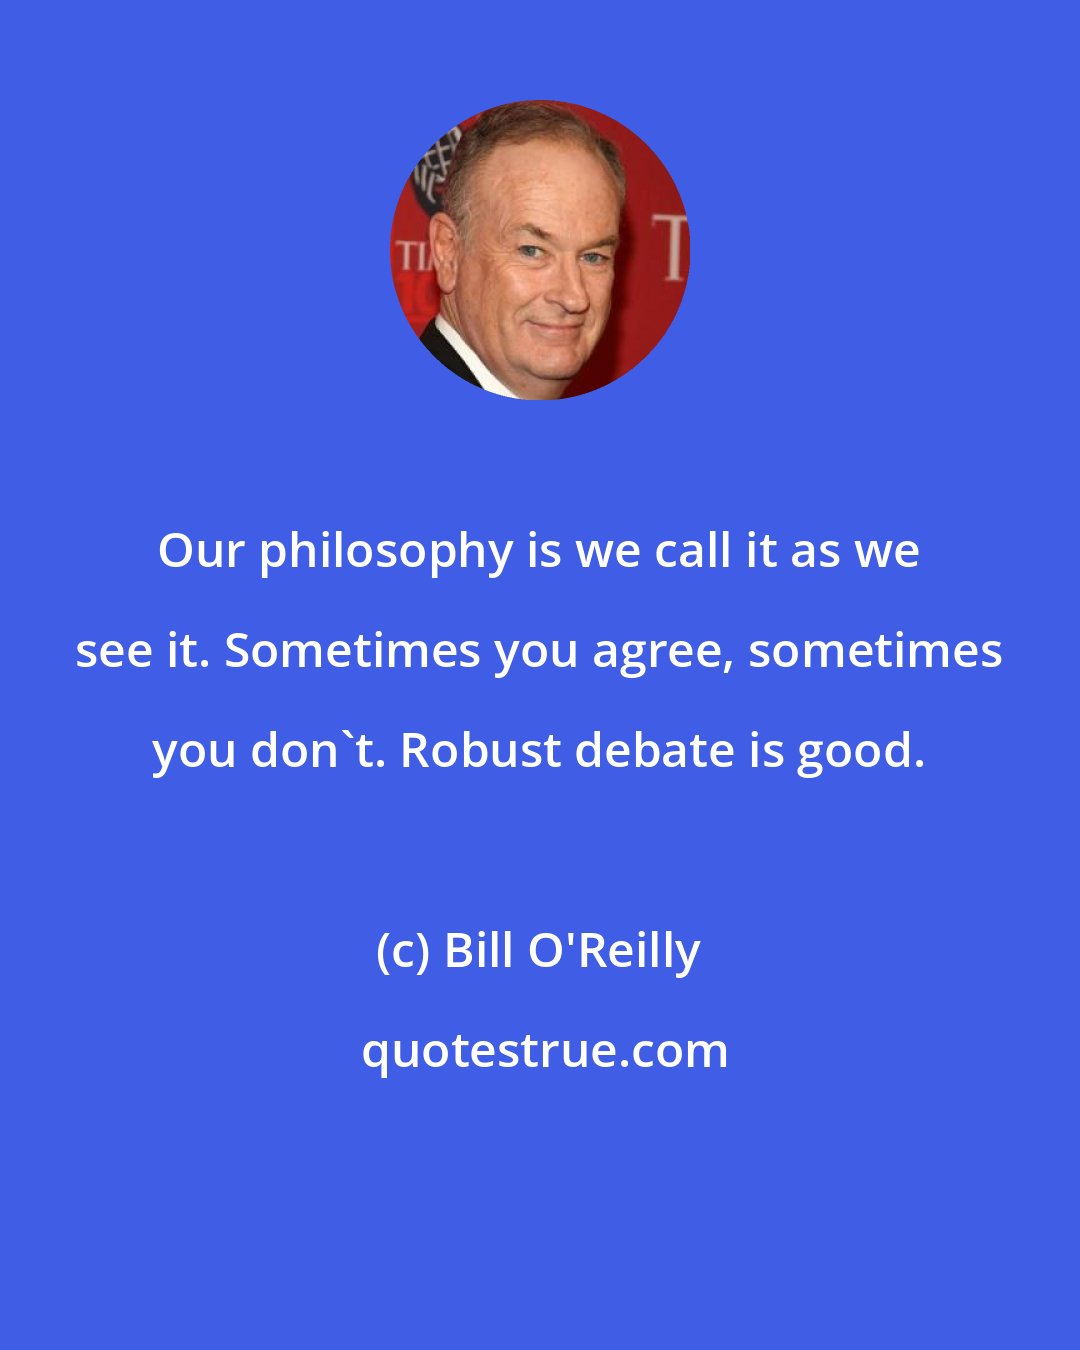 Bill O'Reilly: Our philosophy is we call it as we see it. Sometimes you agree, sometimes you don't. Robust debate is good.